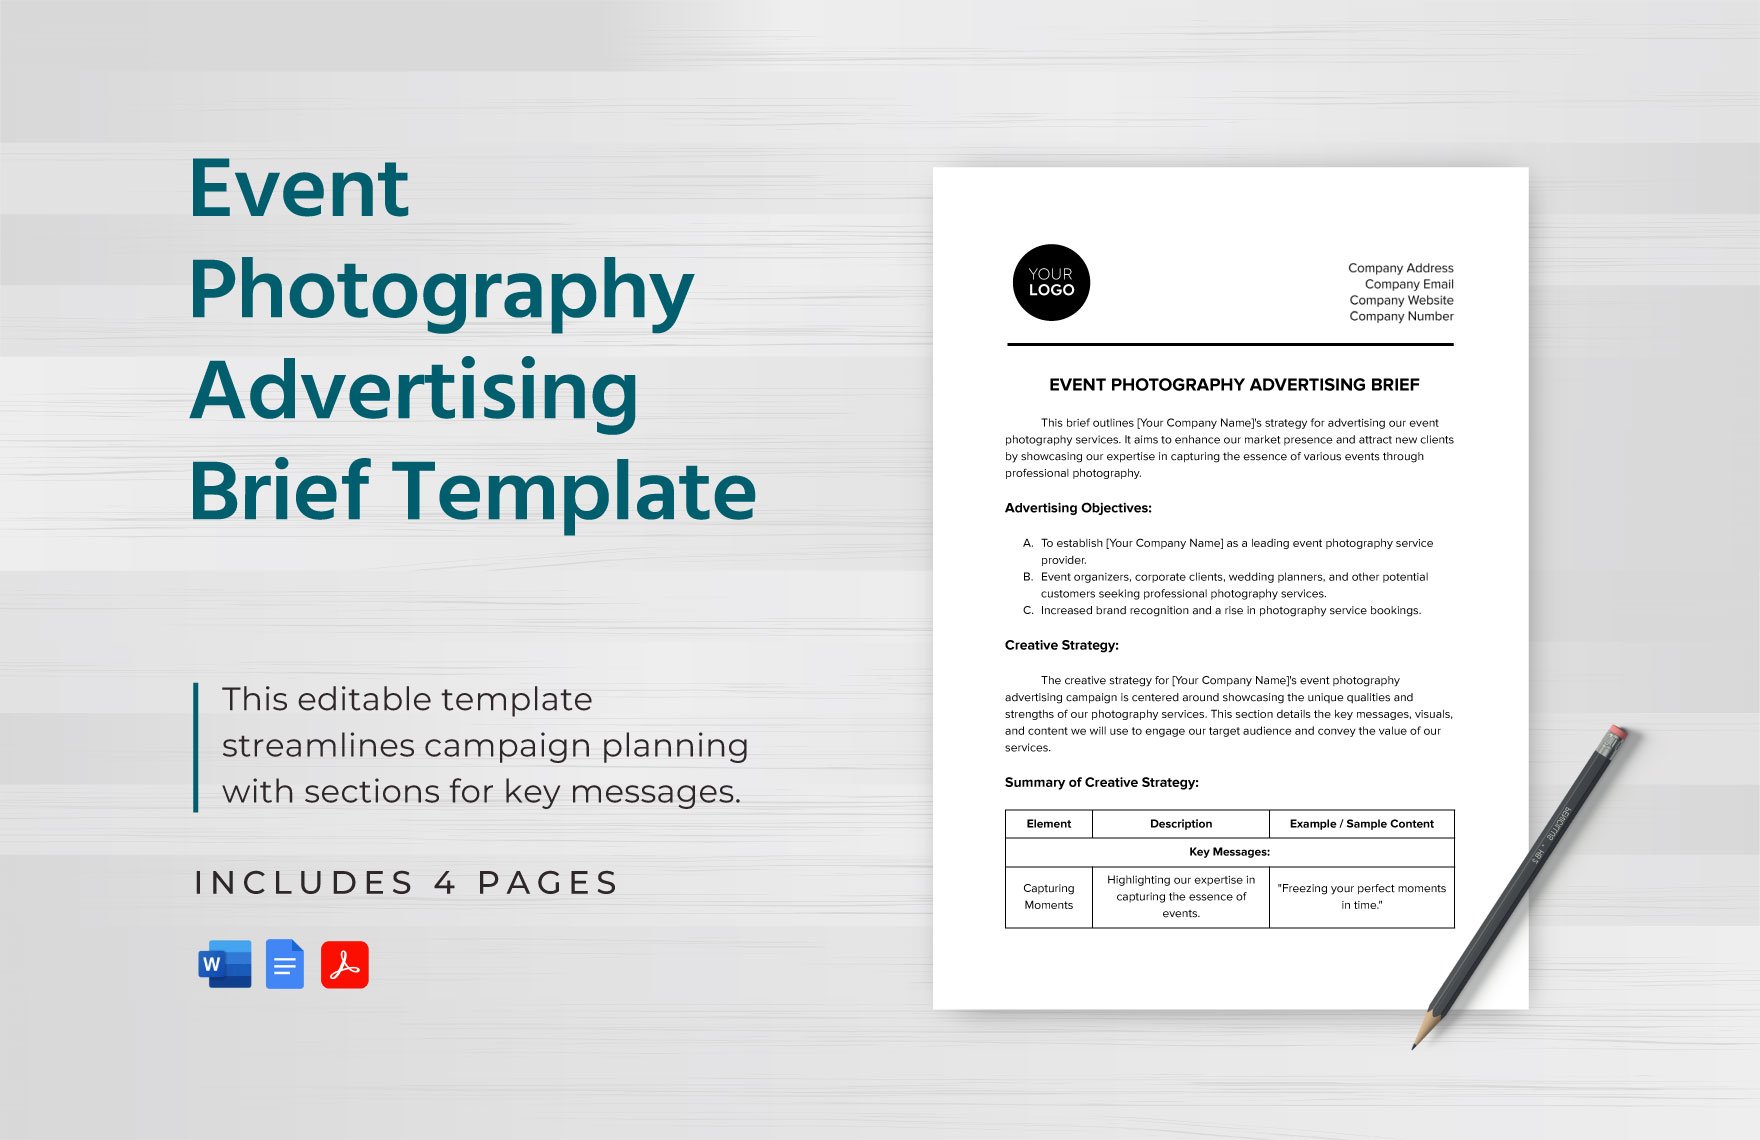 Event Photography Advertising Brief Template